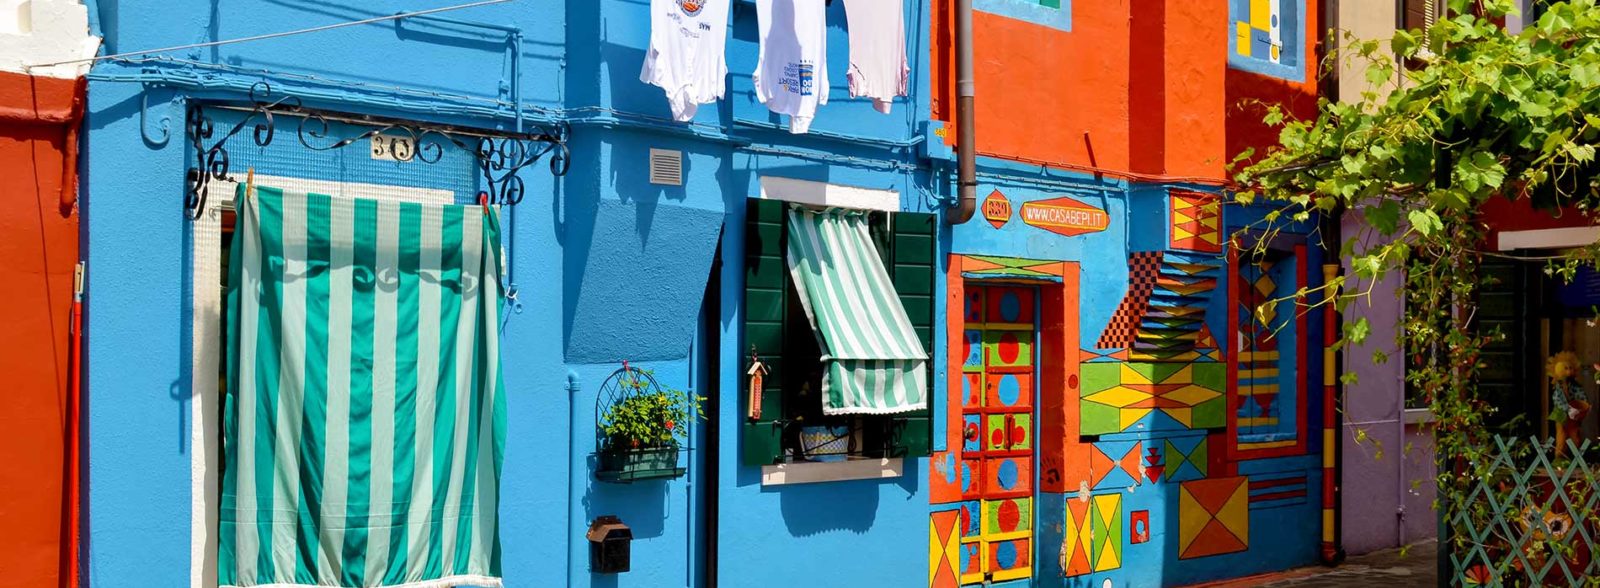 Island of Burano: how to get there and what to see